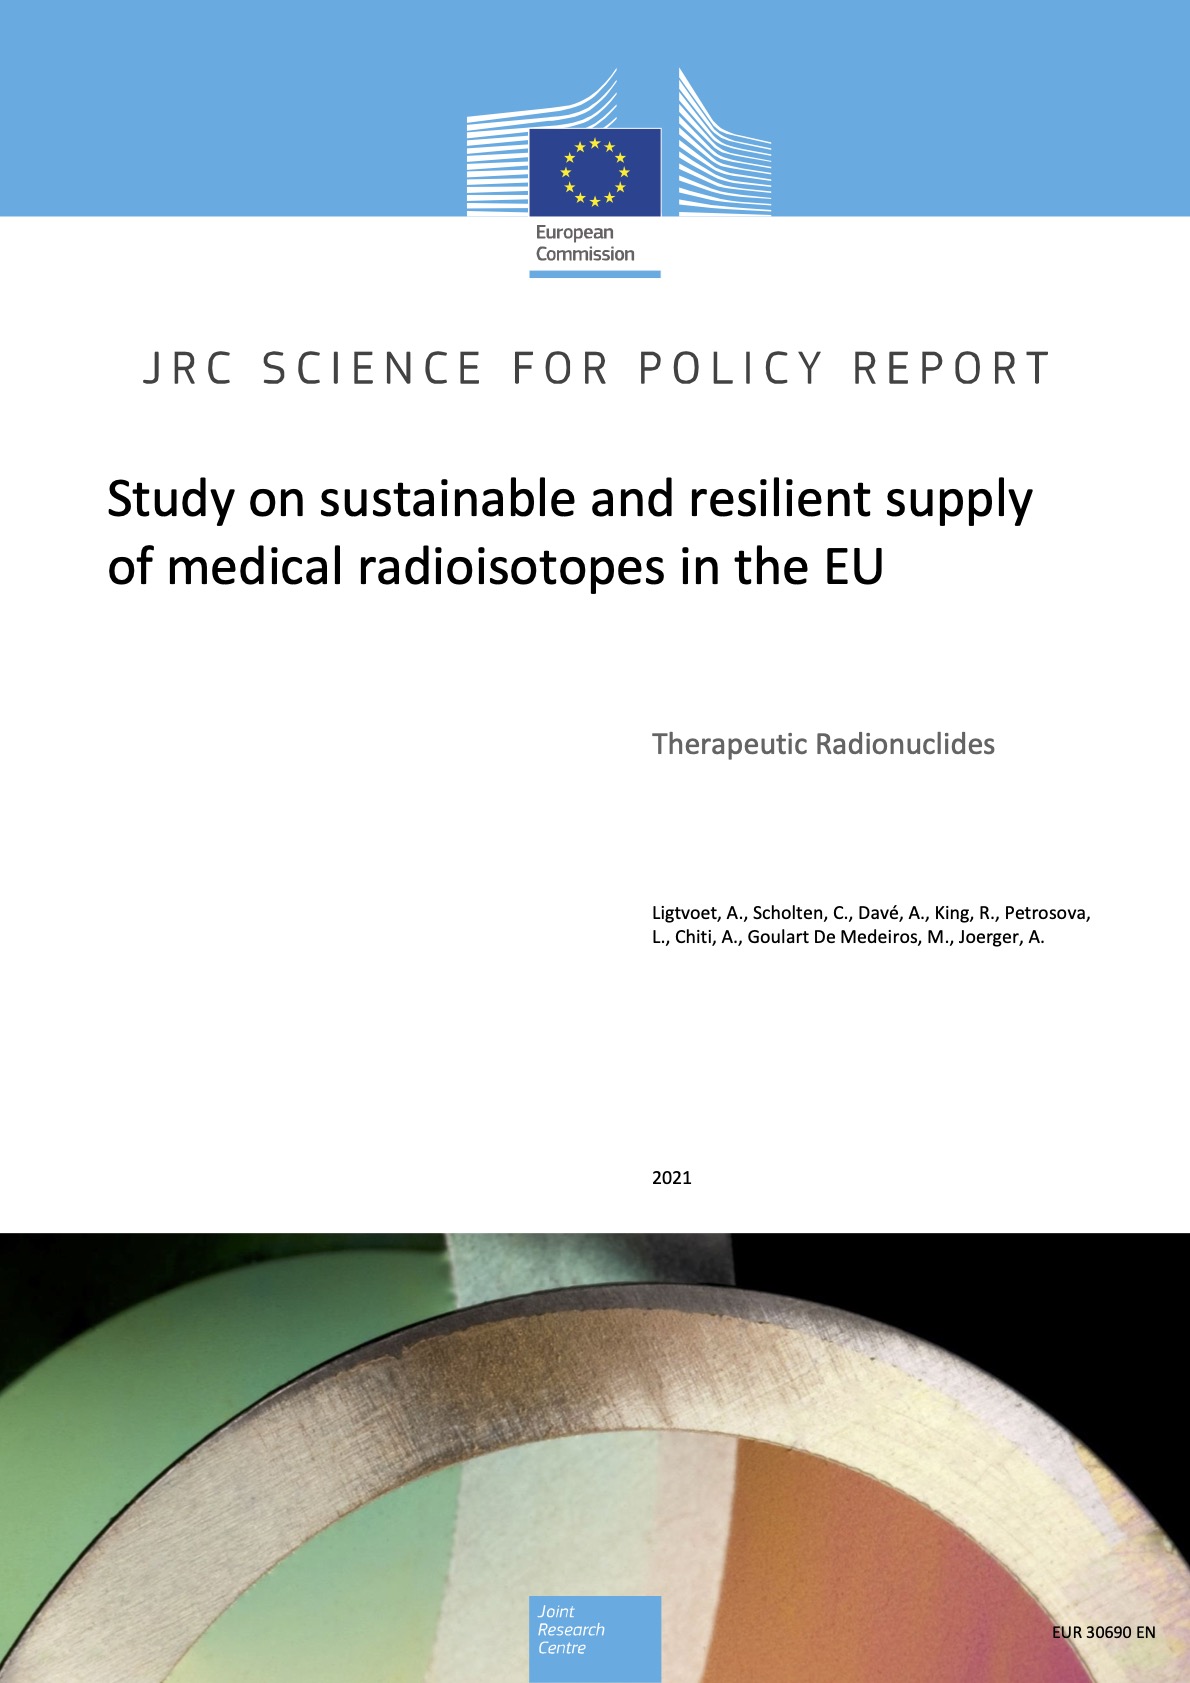 Study on sustainable and resilient supply of medical radioisotopes in the EU